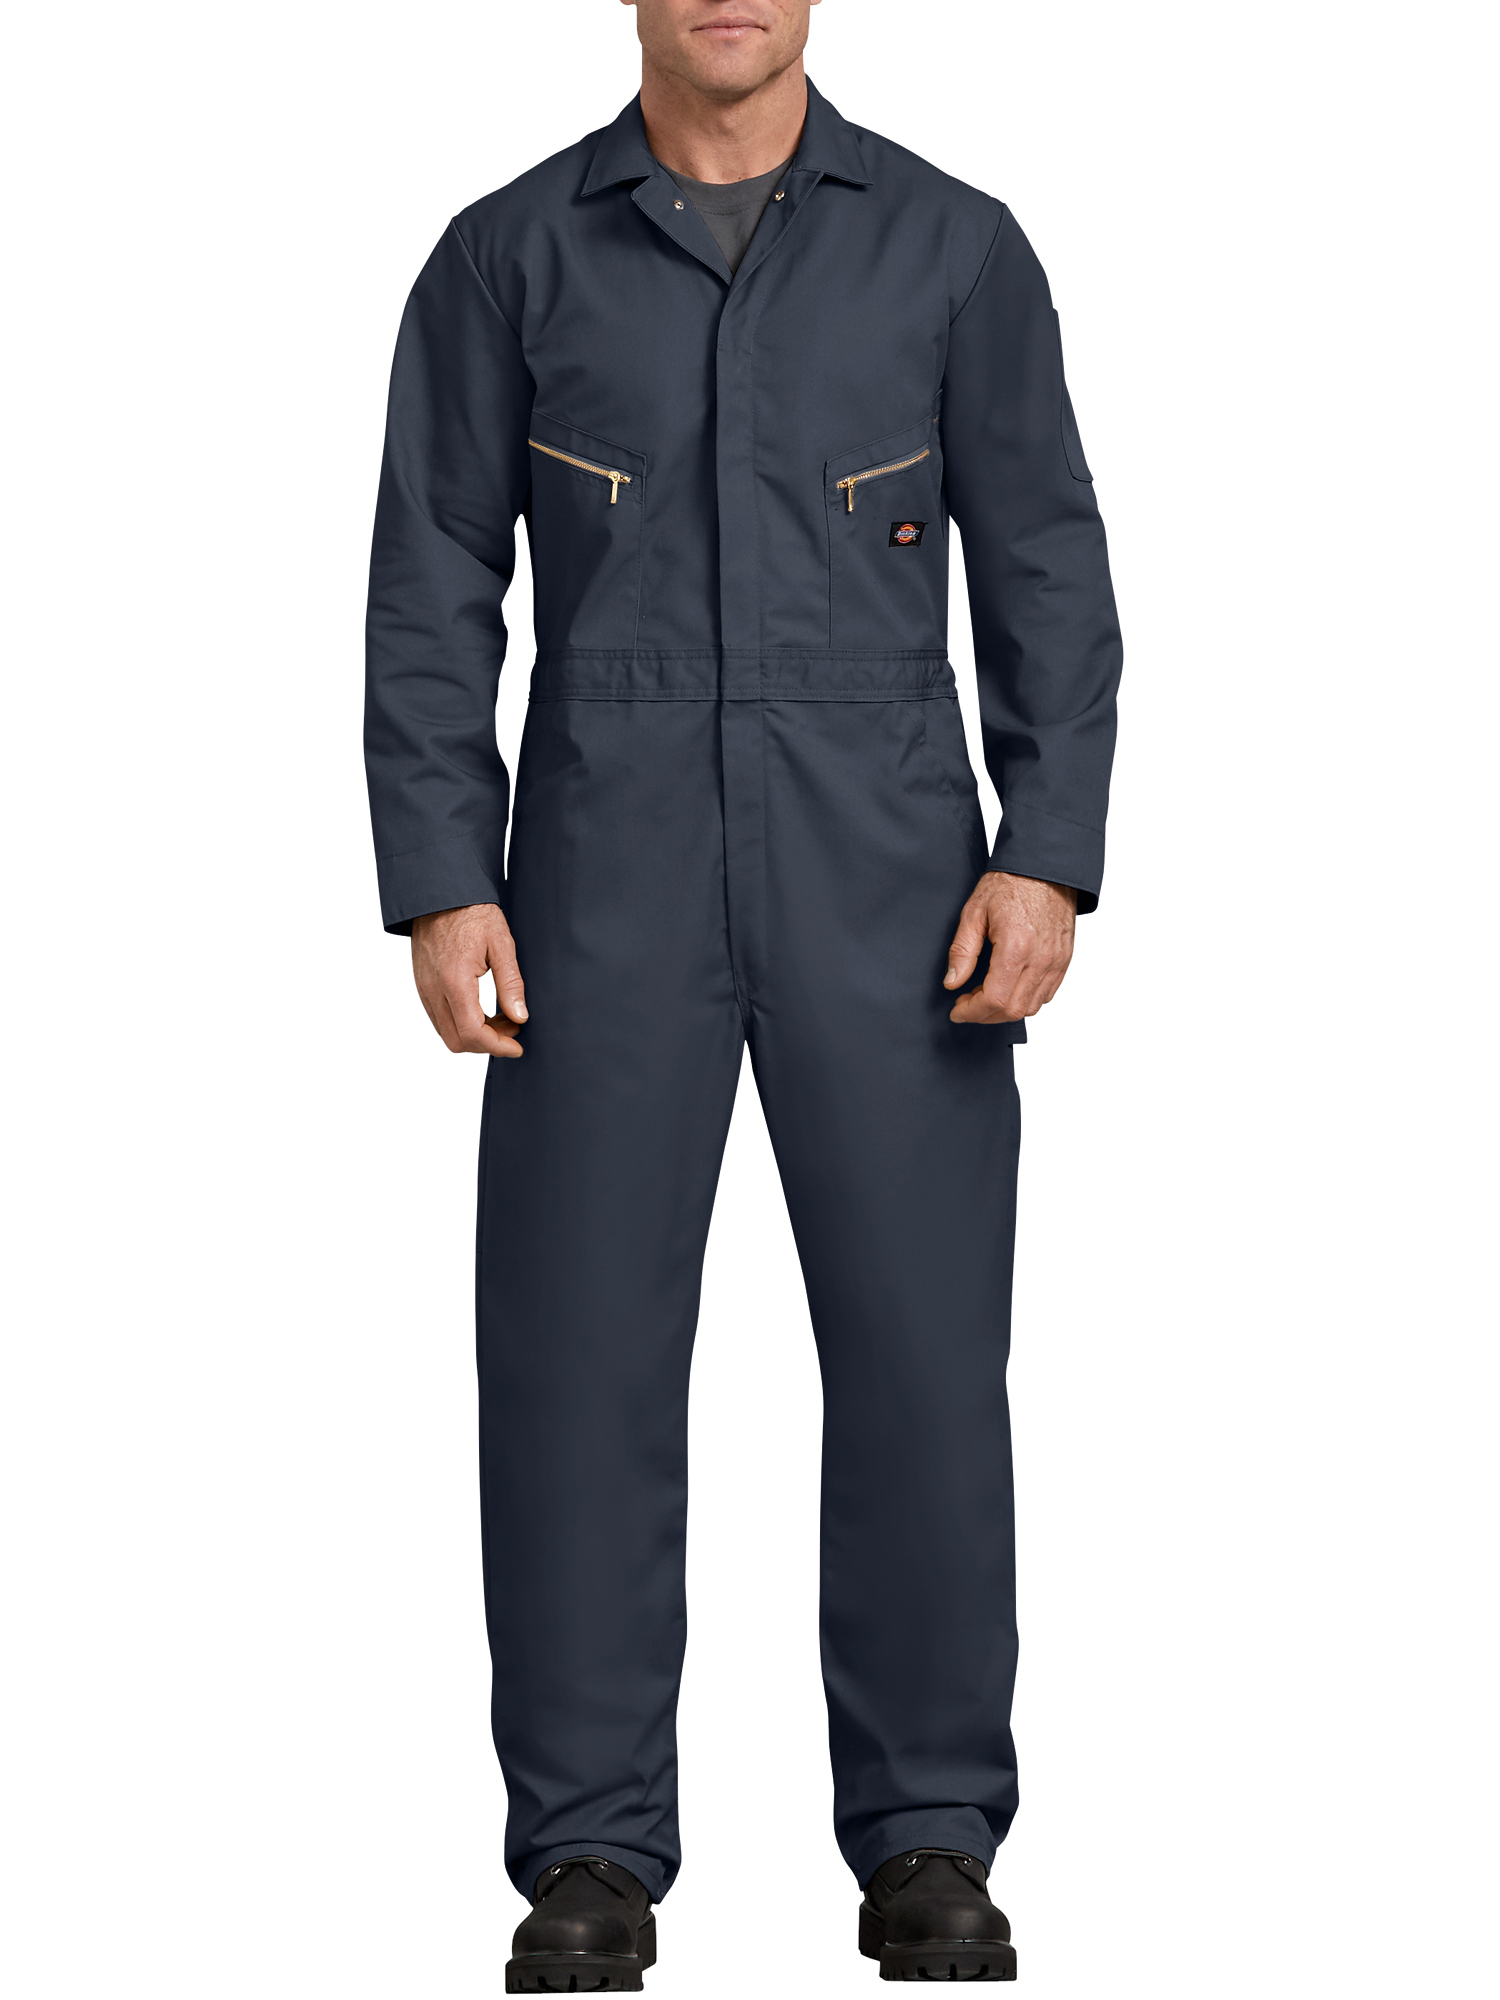 Dickies Mens and Big Mens Deluxe Blended Long Sleeve Coveralls - image 1 of 3